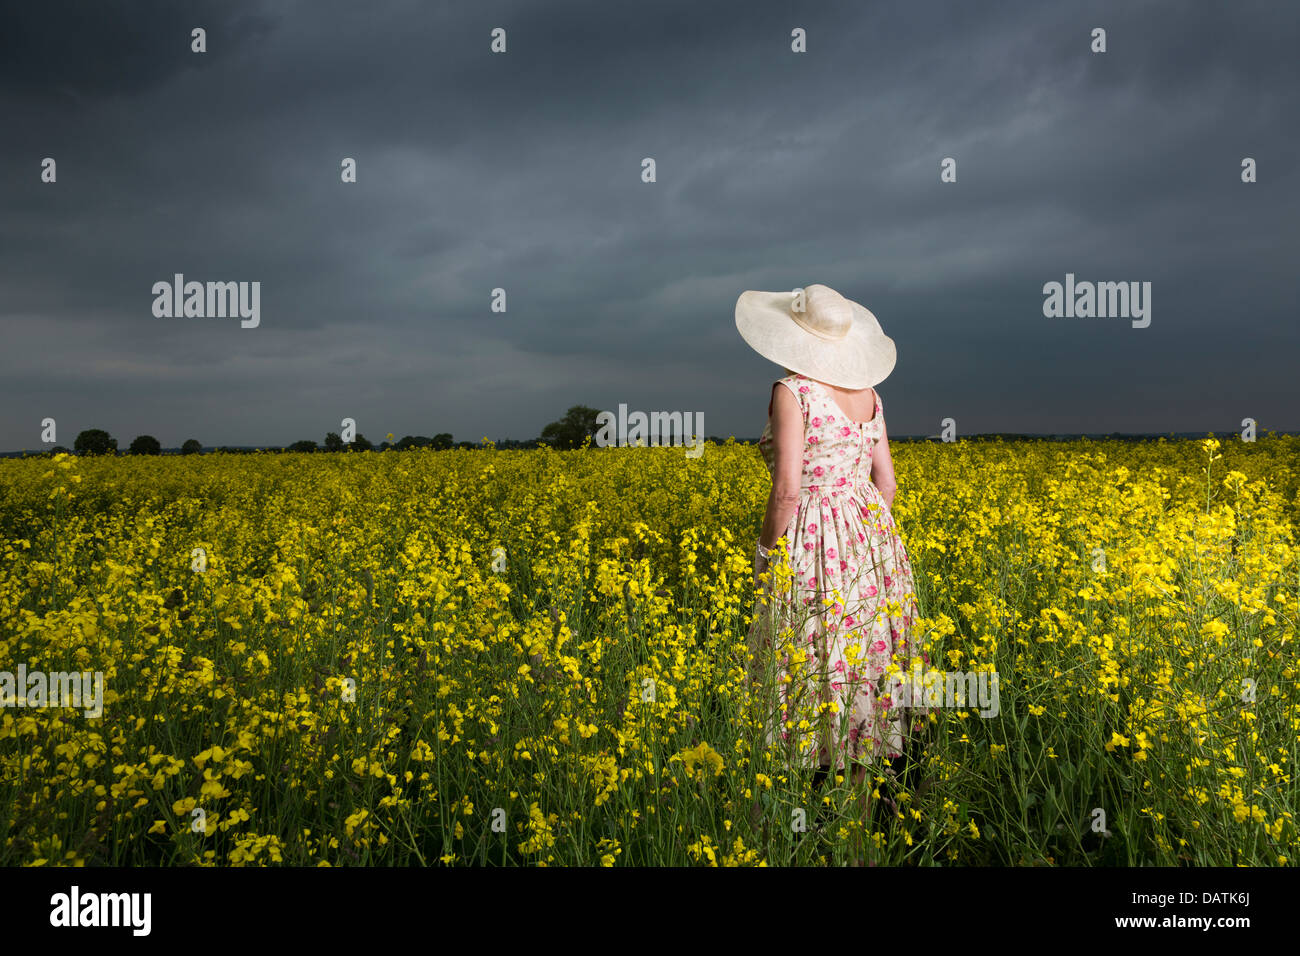 woman standing in field in open countryside with oilseed crop Stock Photo